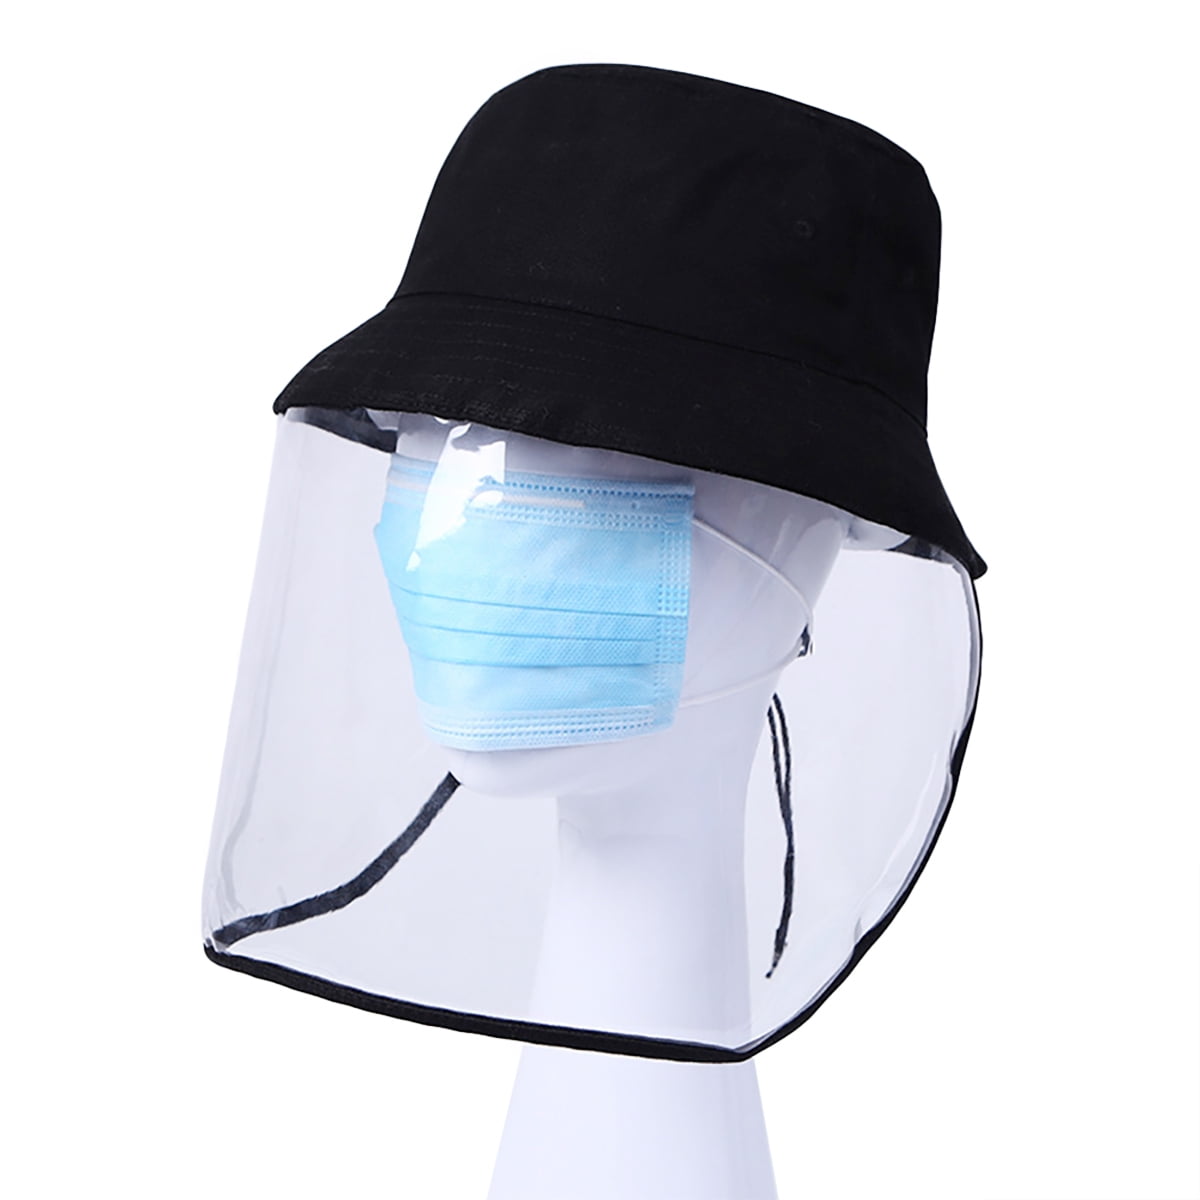 For Kids Safety Face Shield Protective Bucket Hat Fisherman Cap Anti Spitting US 